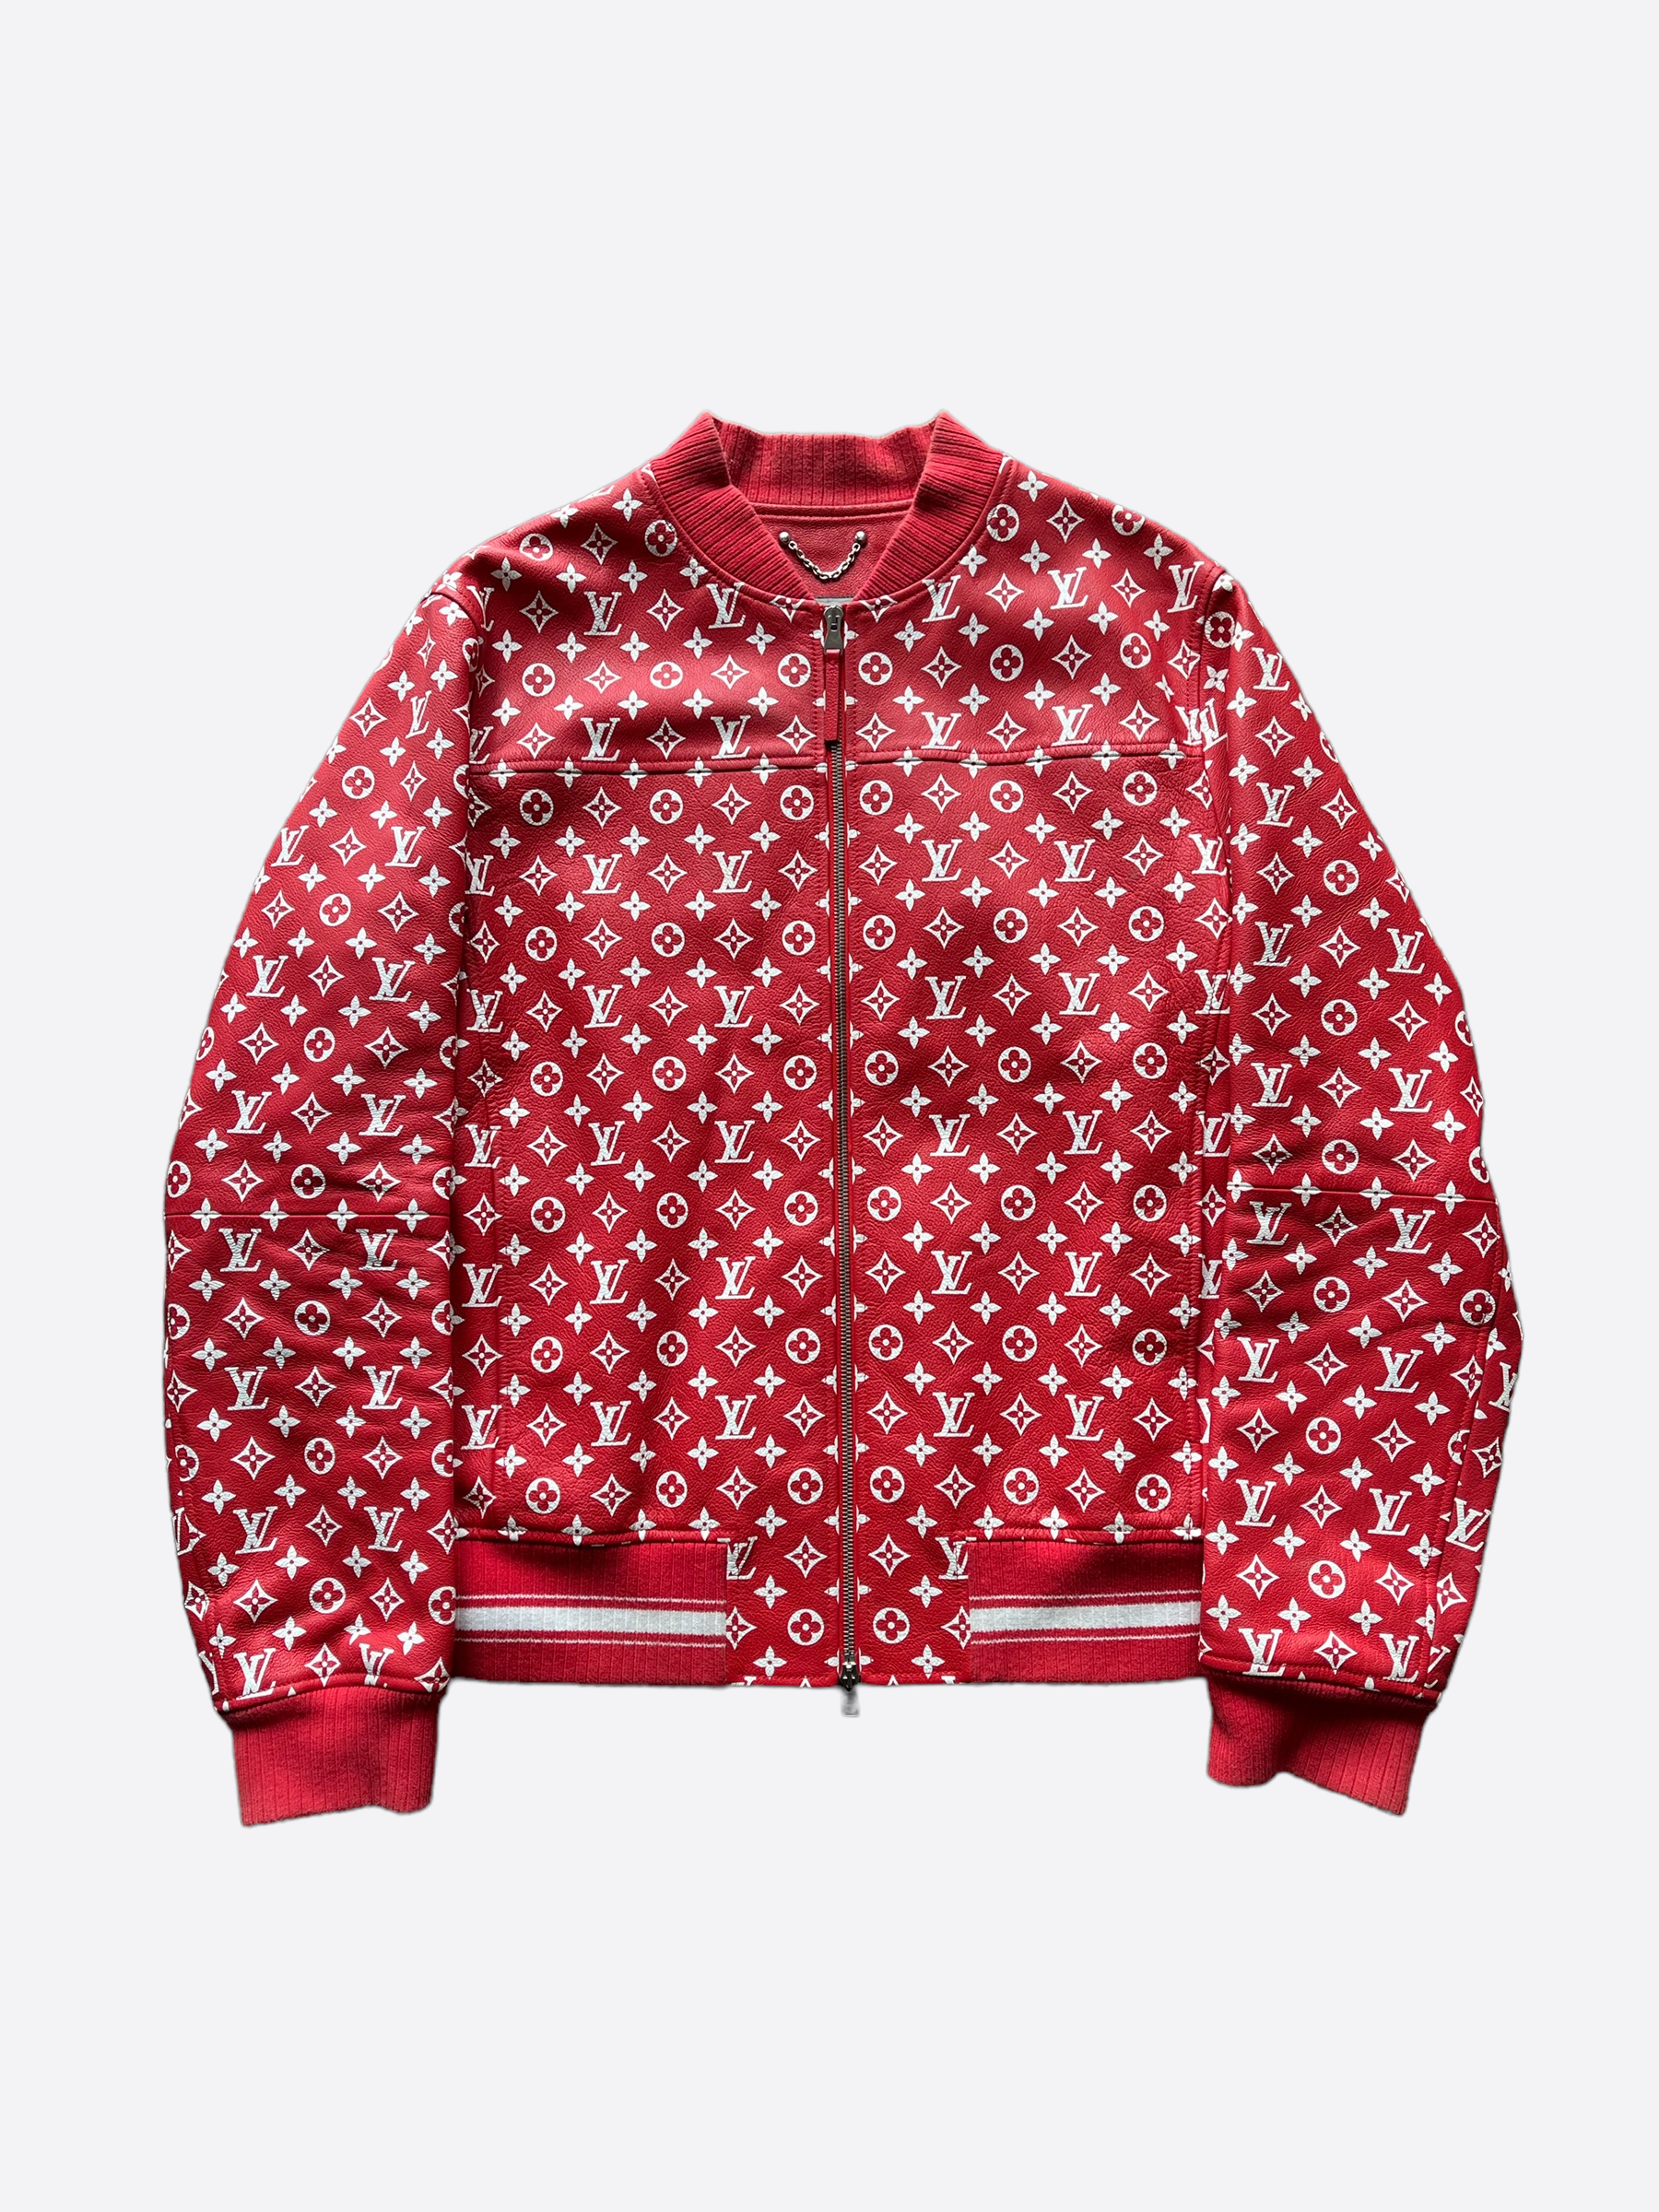 A RED & WHITE LEATHER BOMBER JACKET BY SUPREME, LOUIS VUITTON, 2017